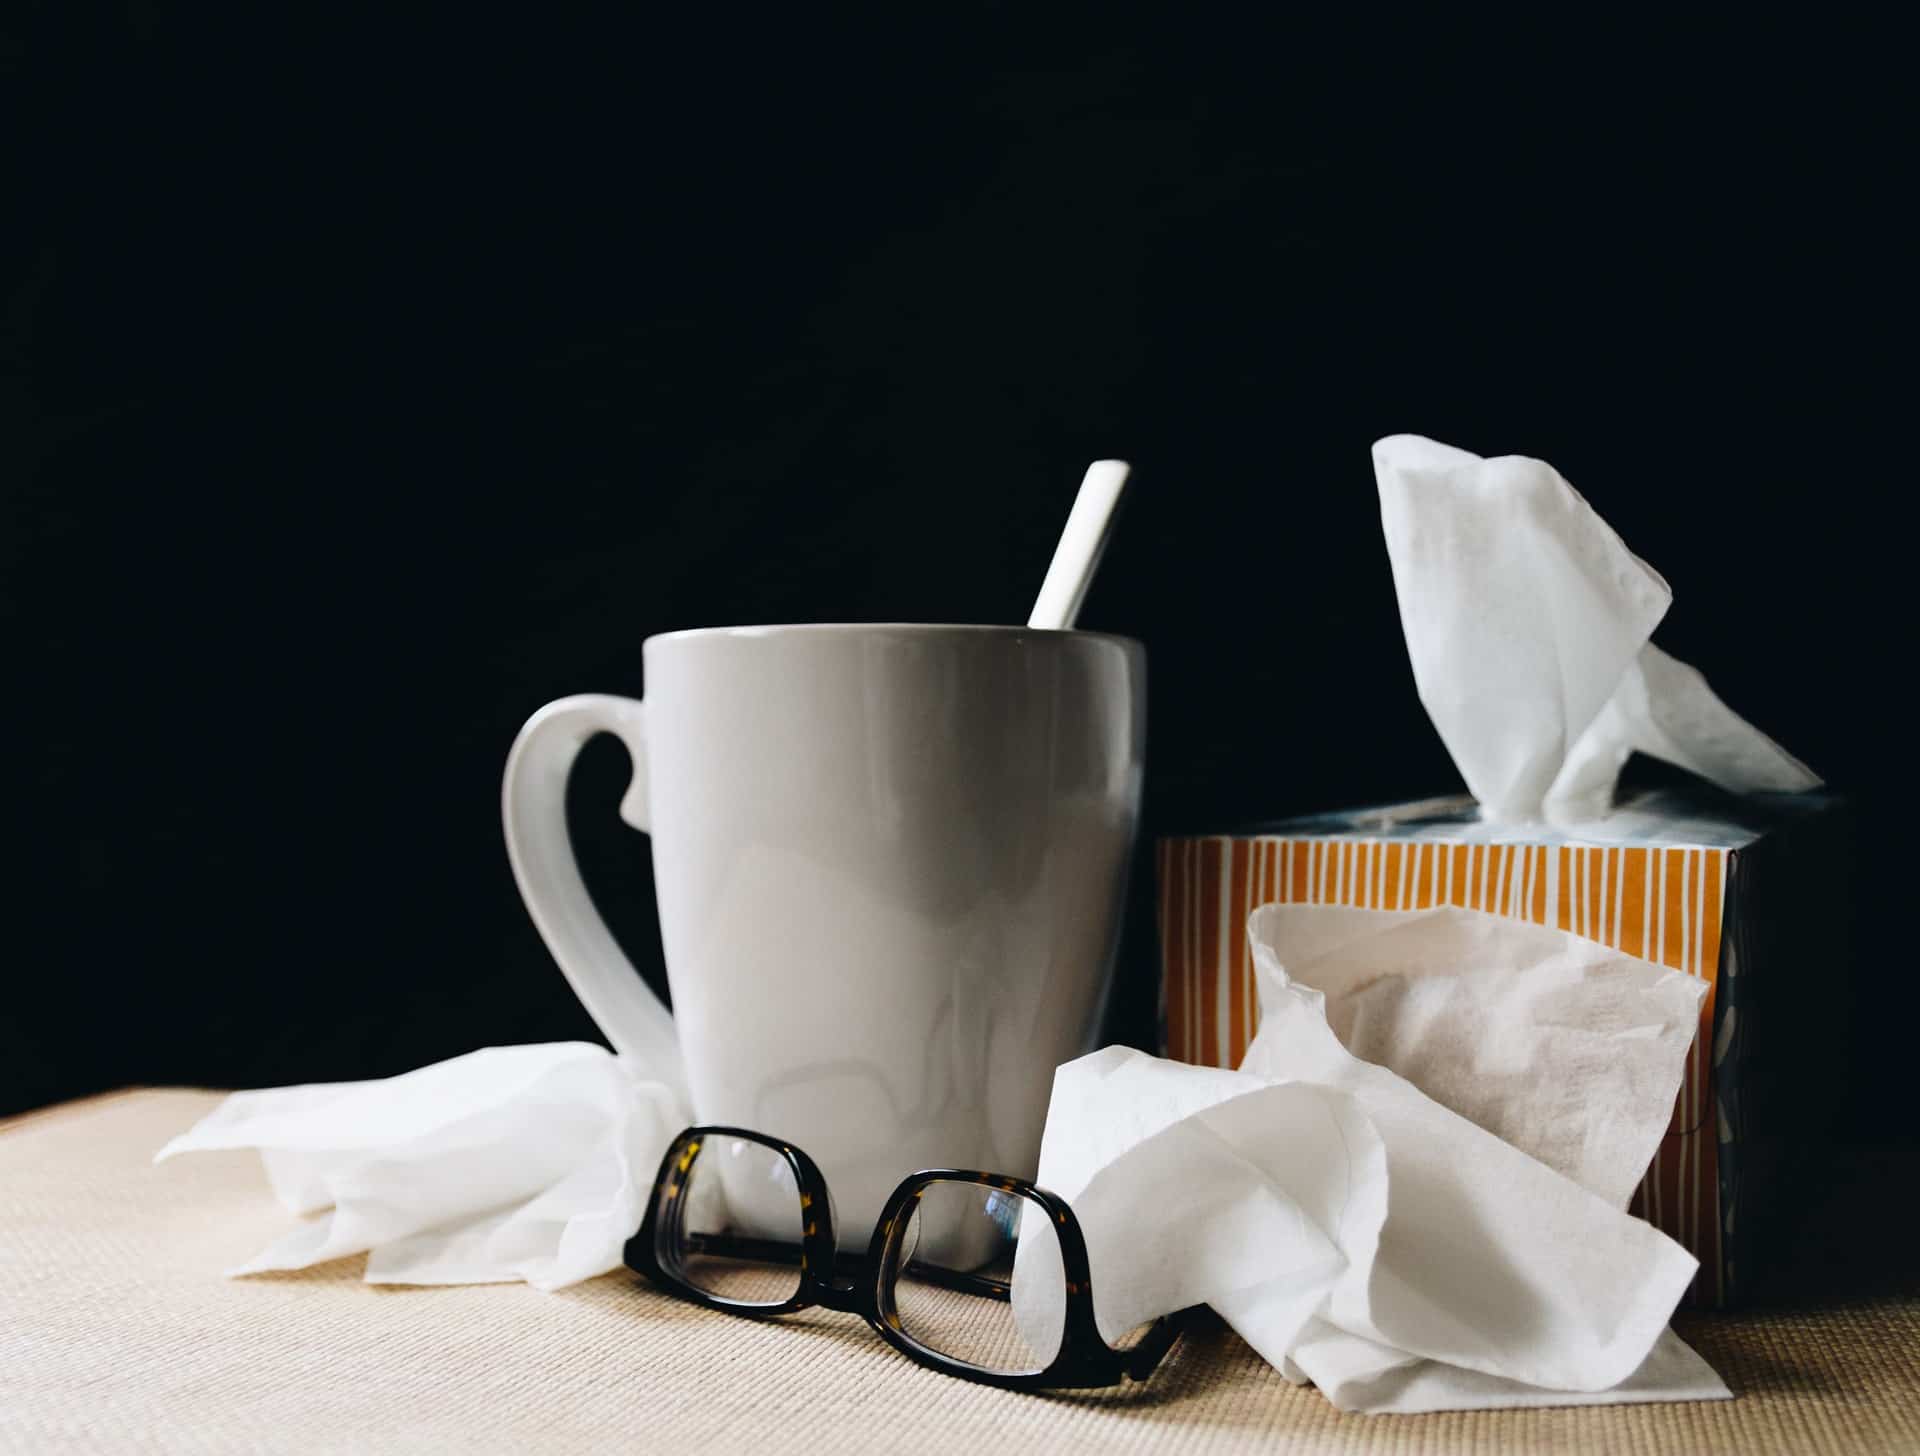 Tissues and a mug representing paid leave in Ontario for employees who are sick or required to stay home due to COVID-19